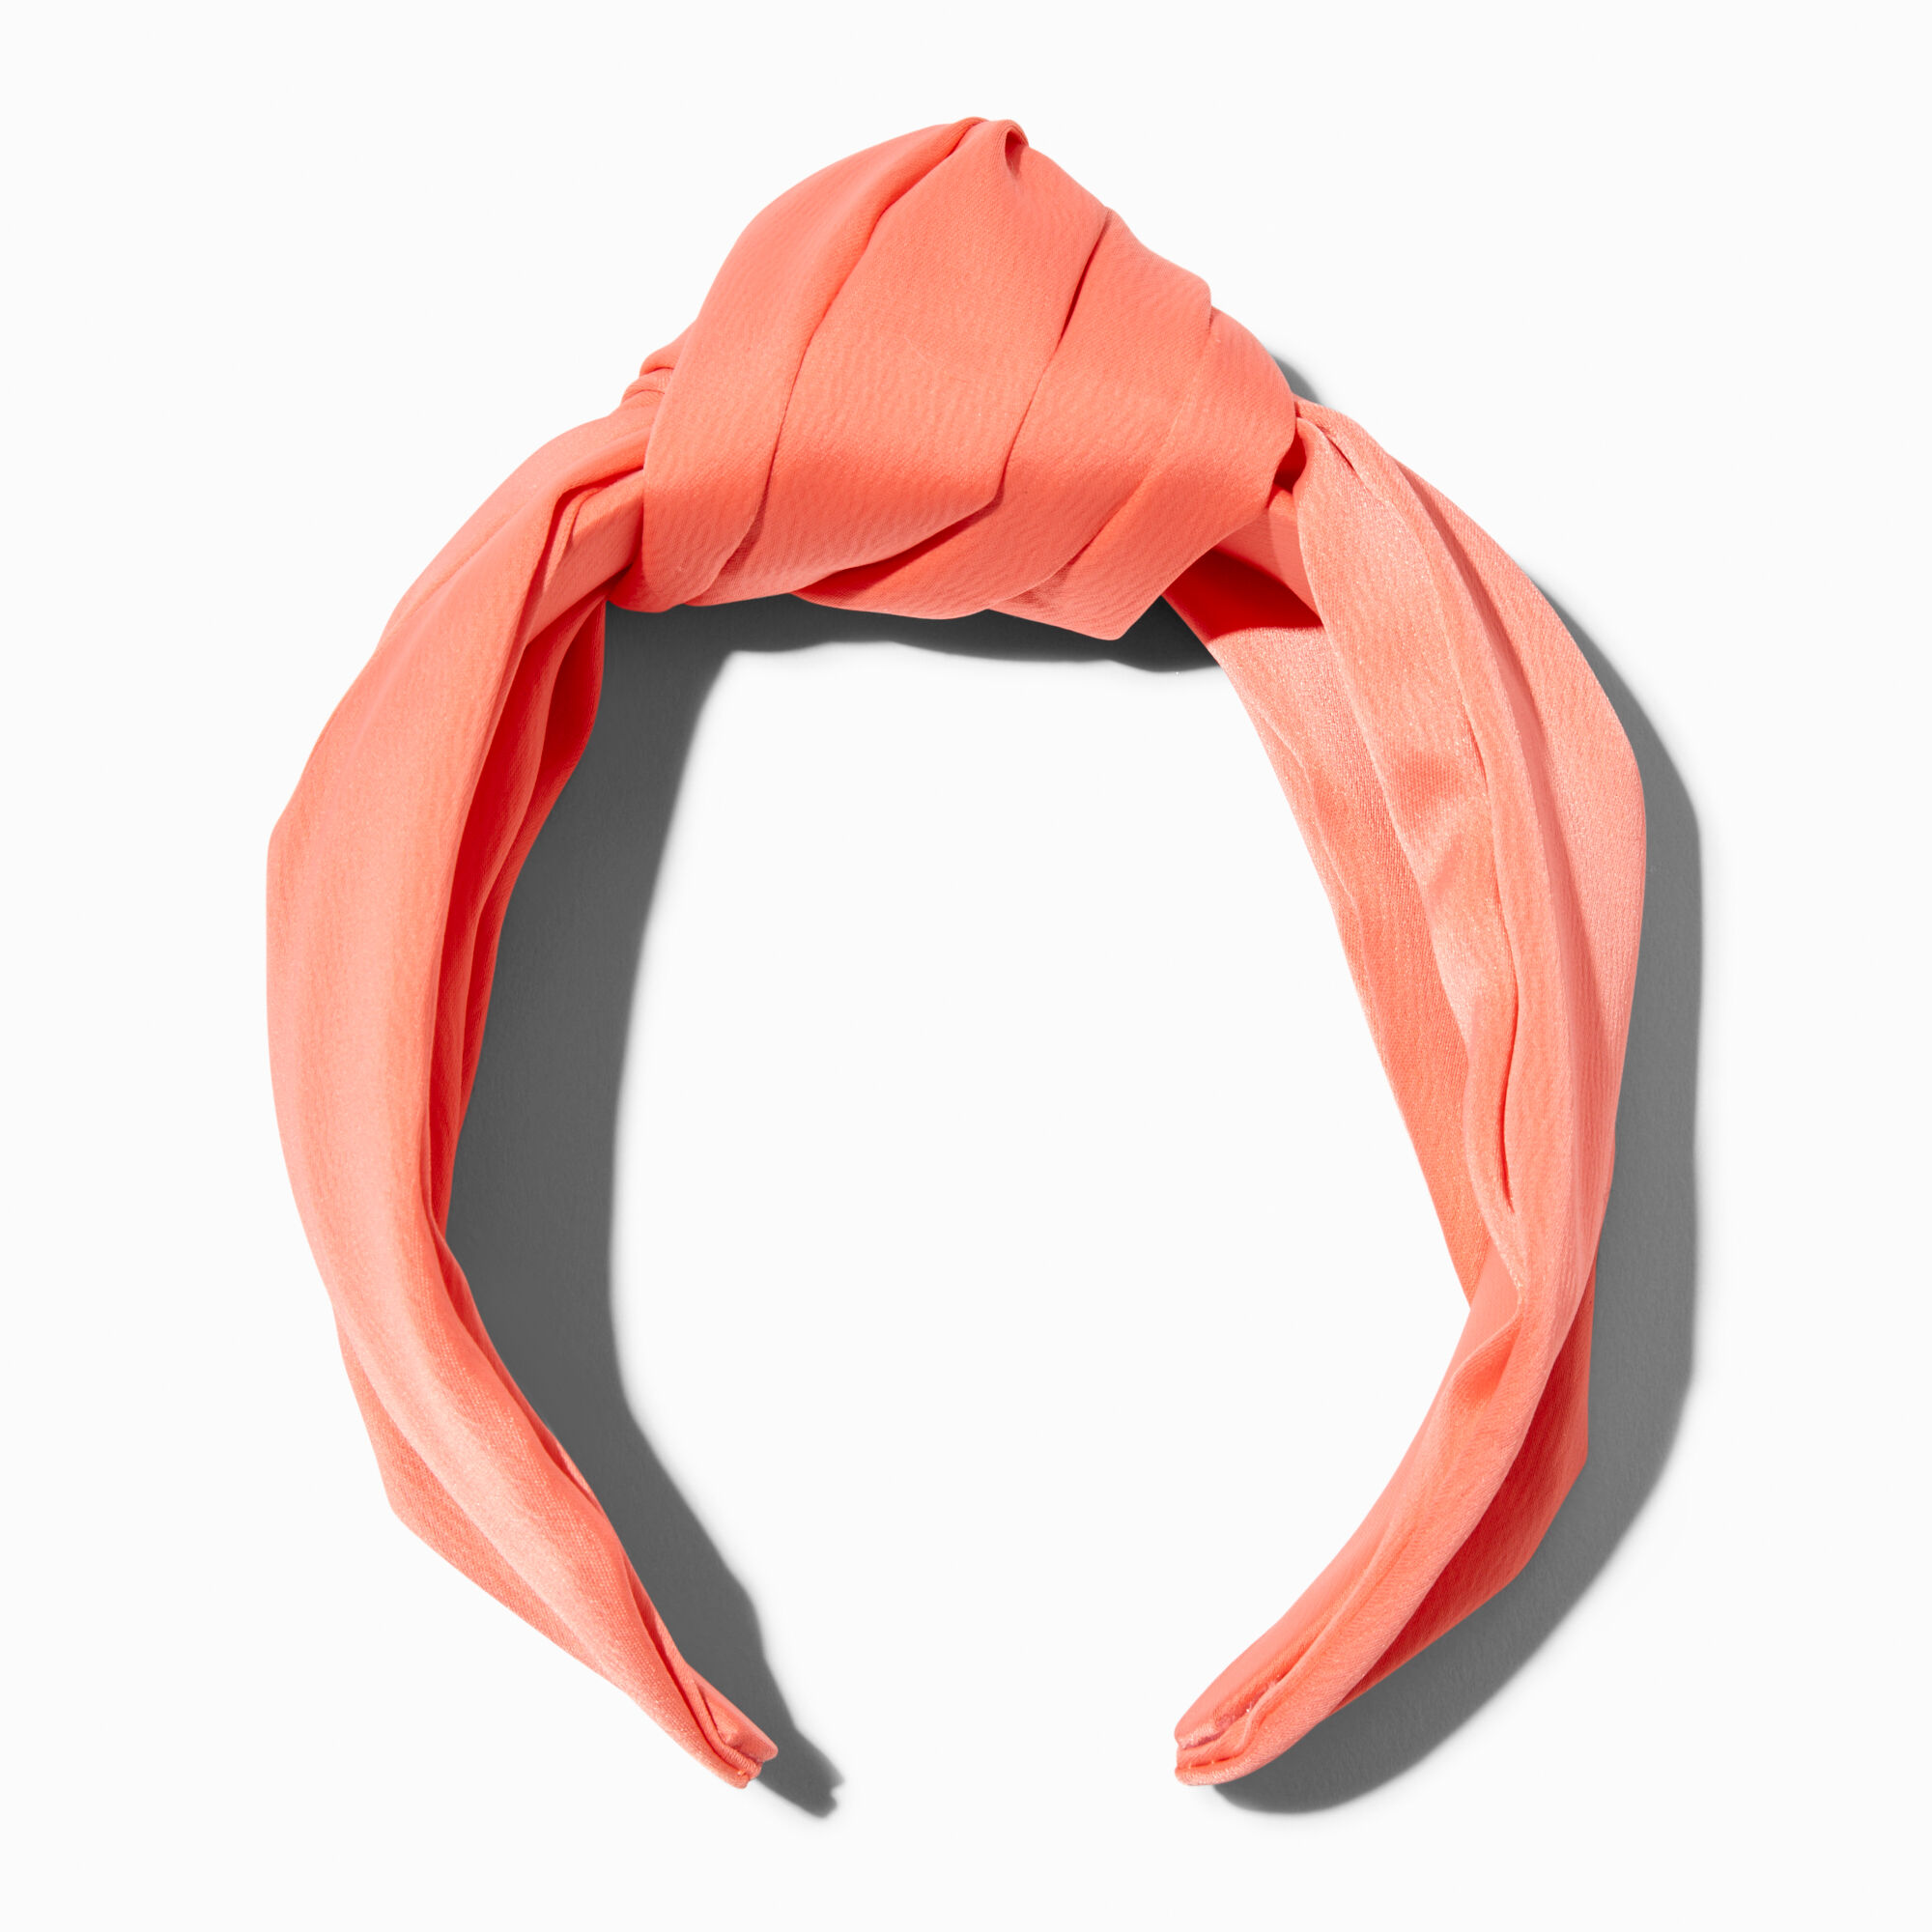 View Claires Melon Satin Knotted Headband Orange information